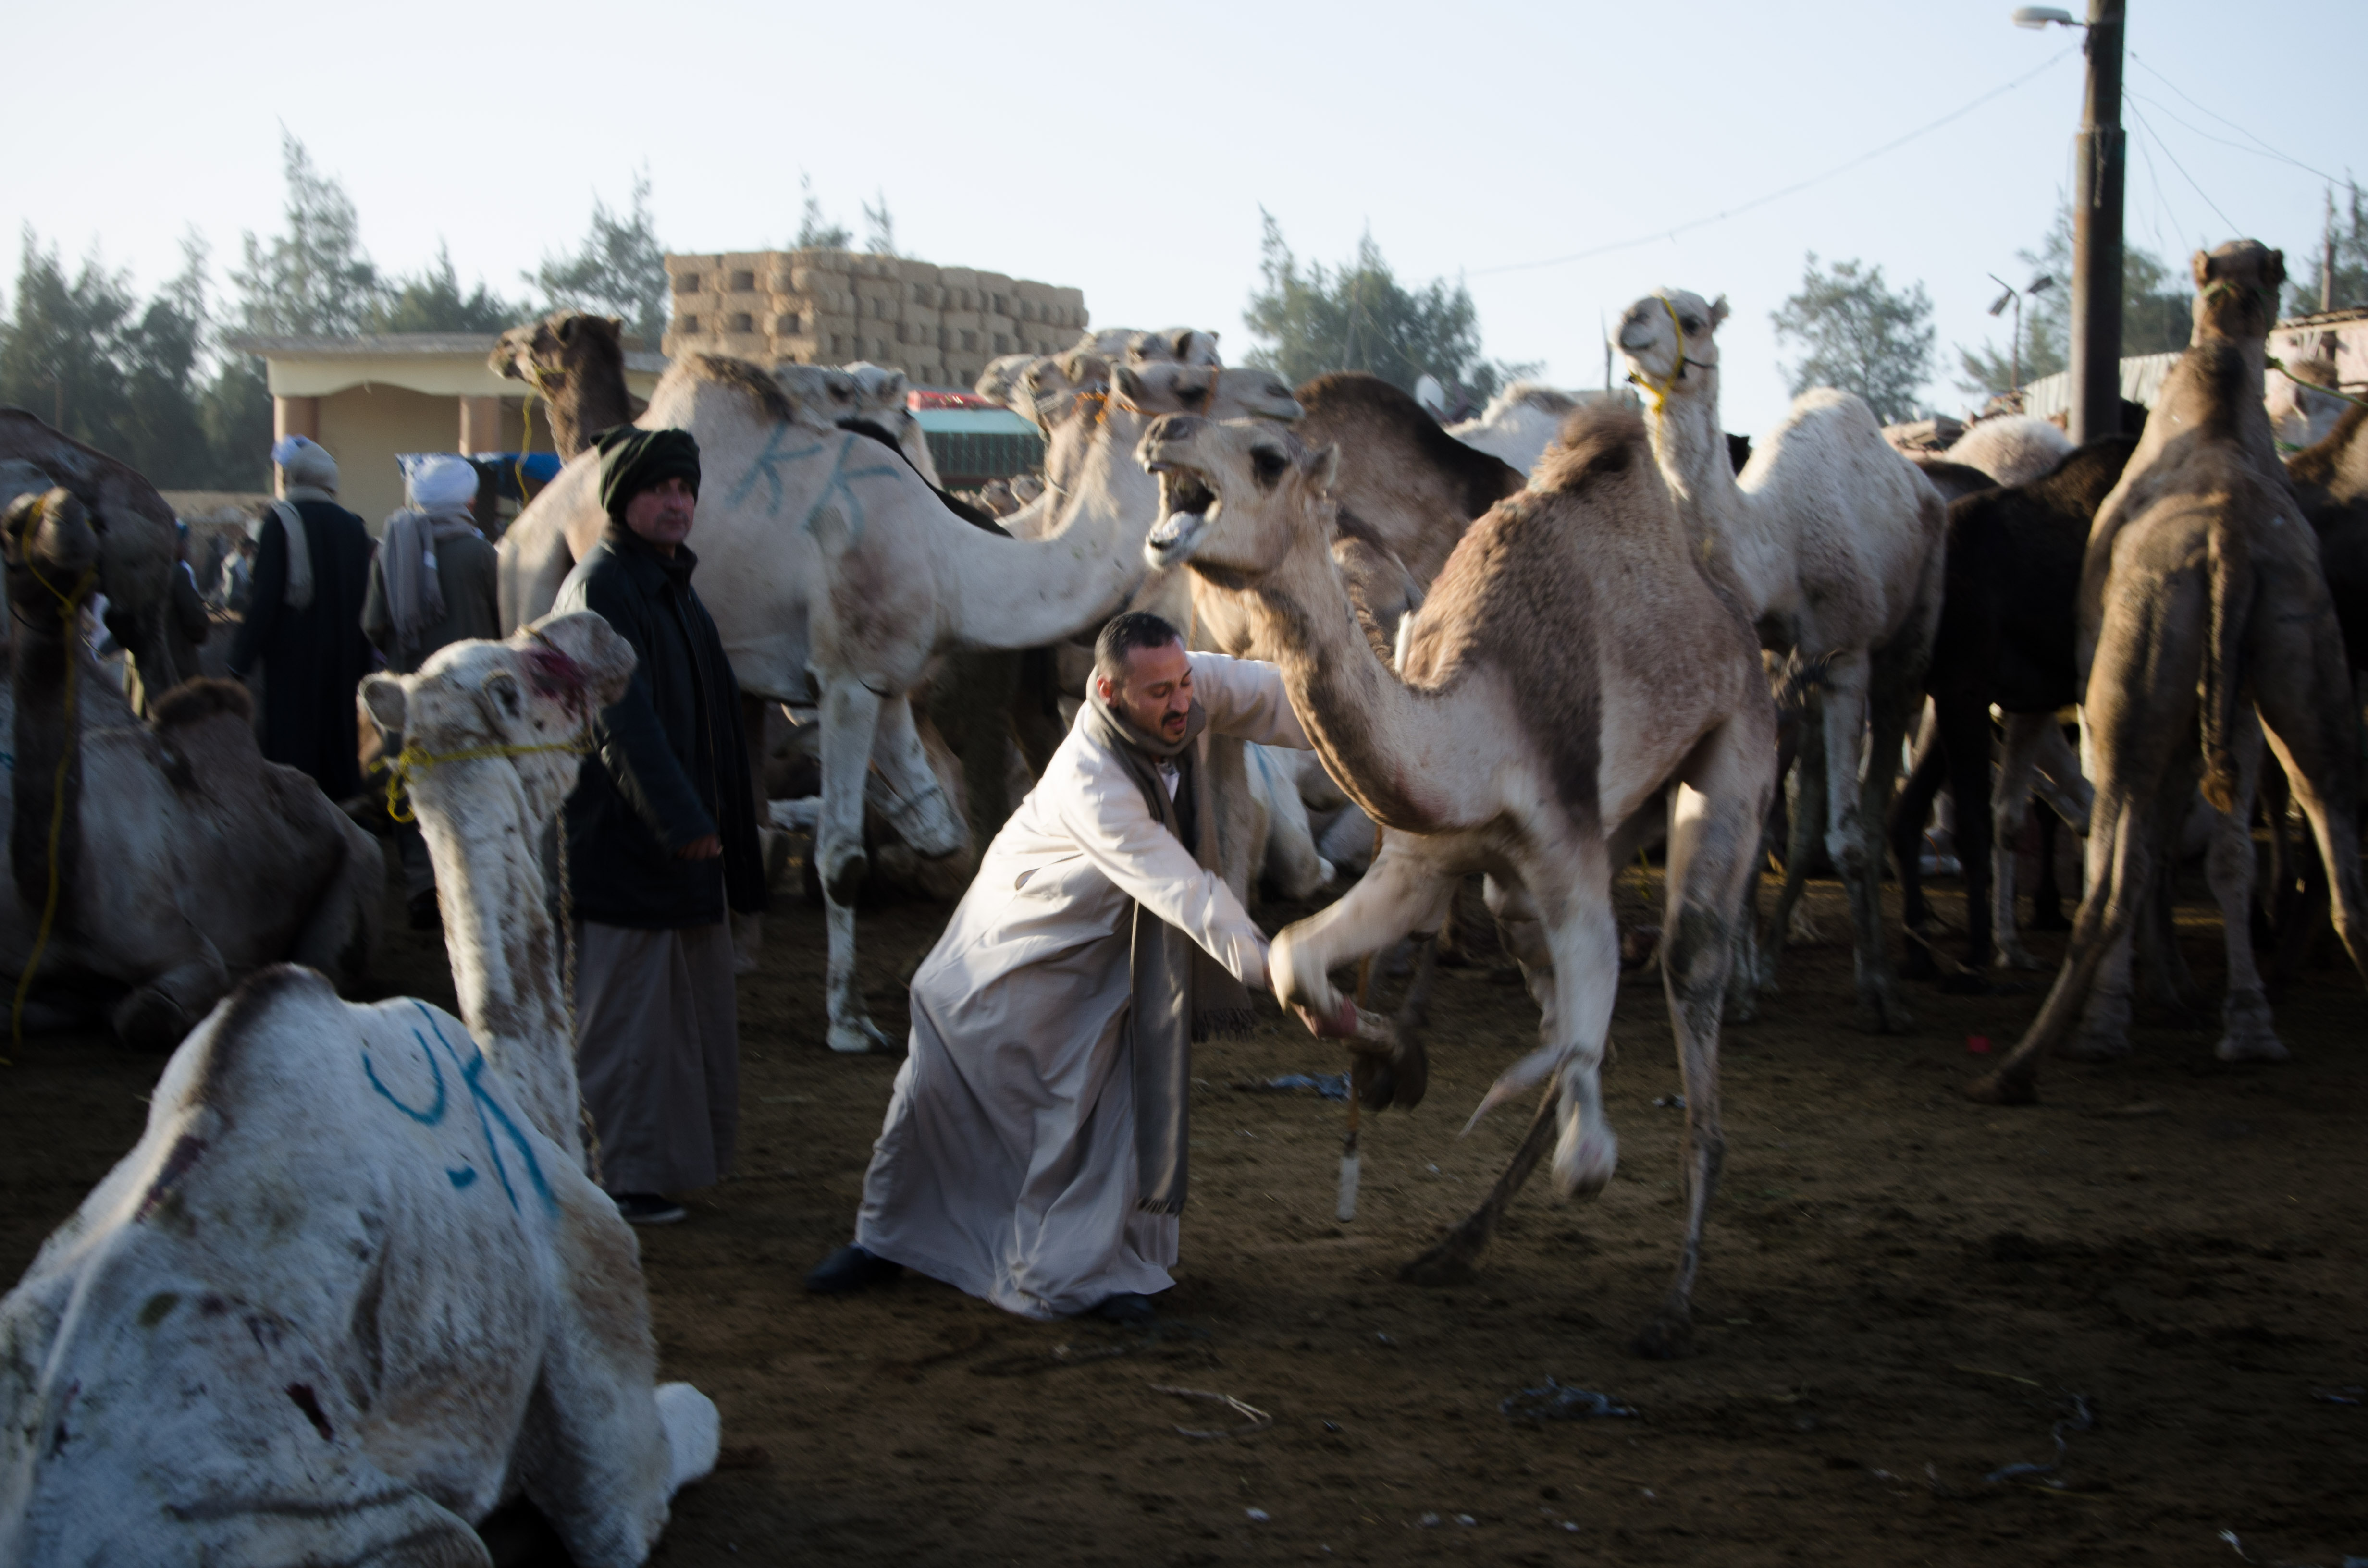 There is not much opportunity for sentiment in the busy camel market. The work must be done and the boys must grow up. As the surrounding camels are raised specifically for slaughter, the boys are funneled down a path that is almost as rigid.